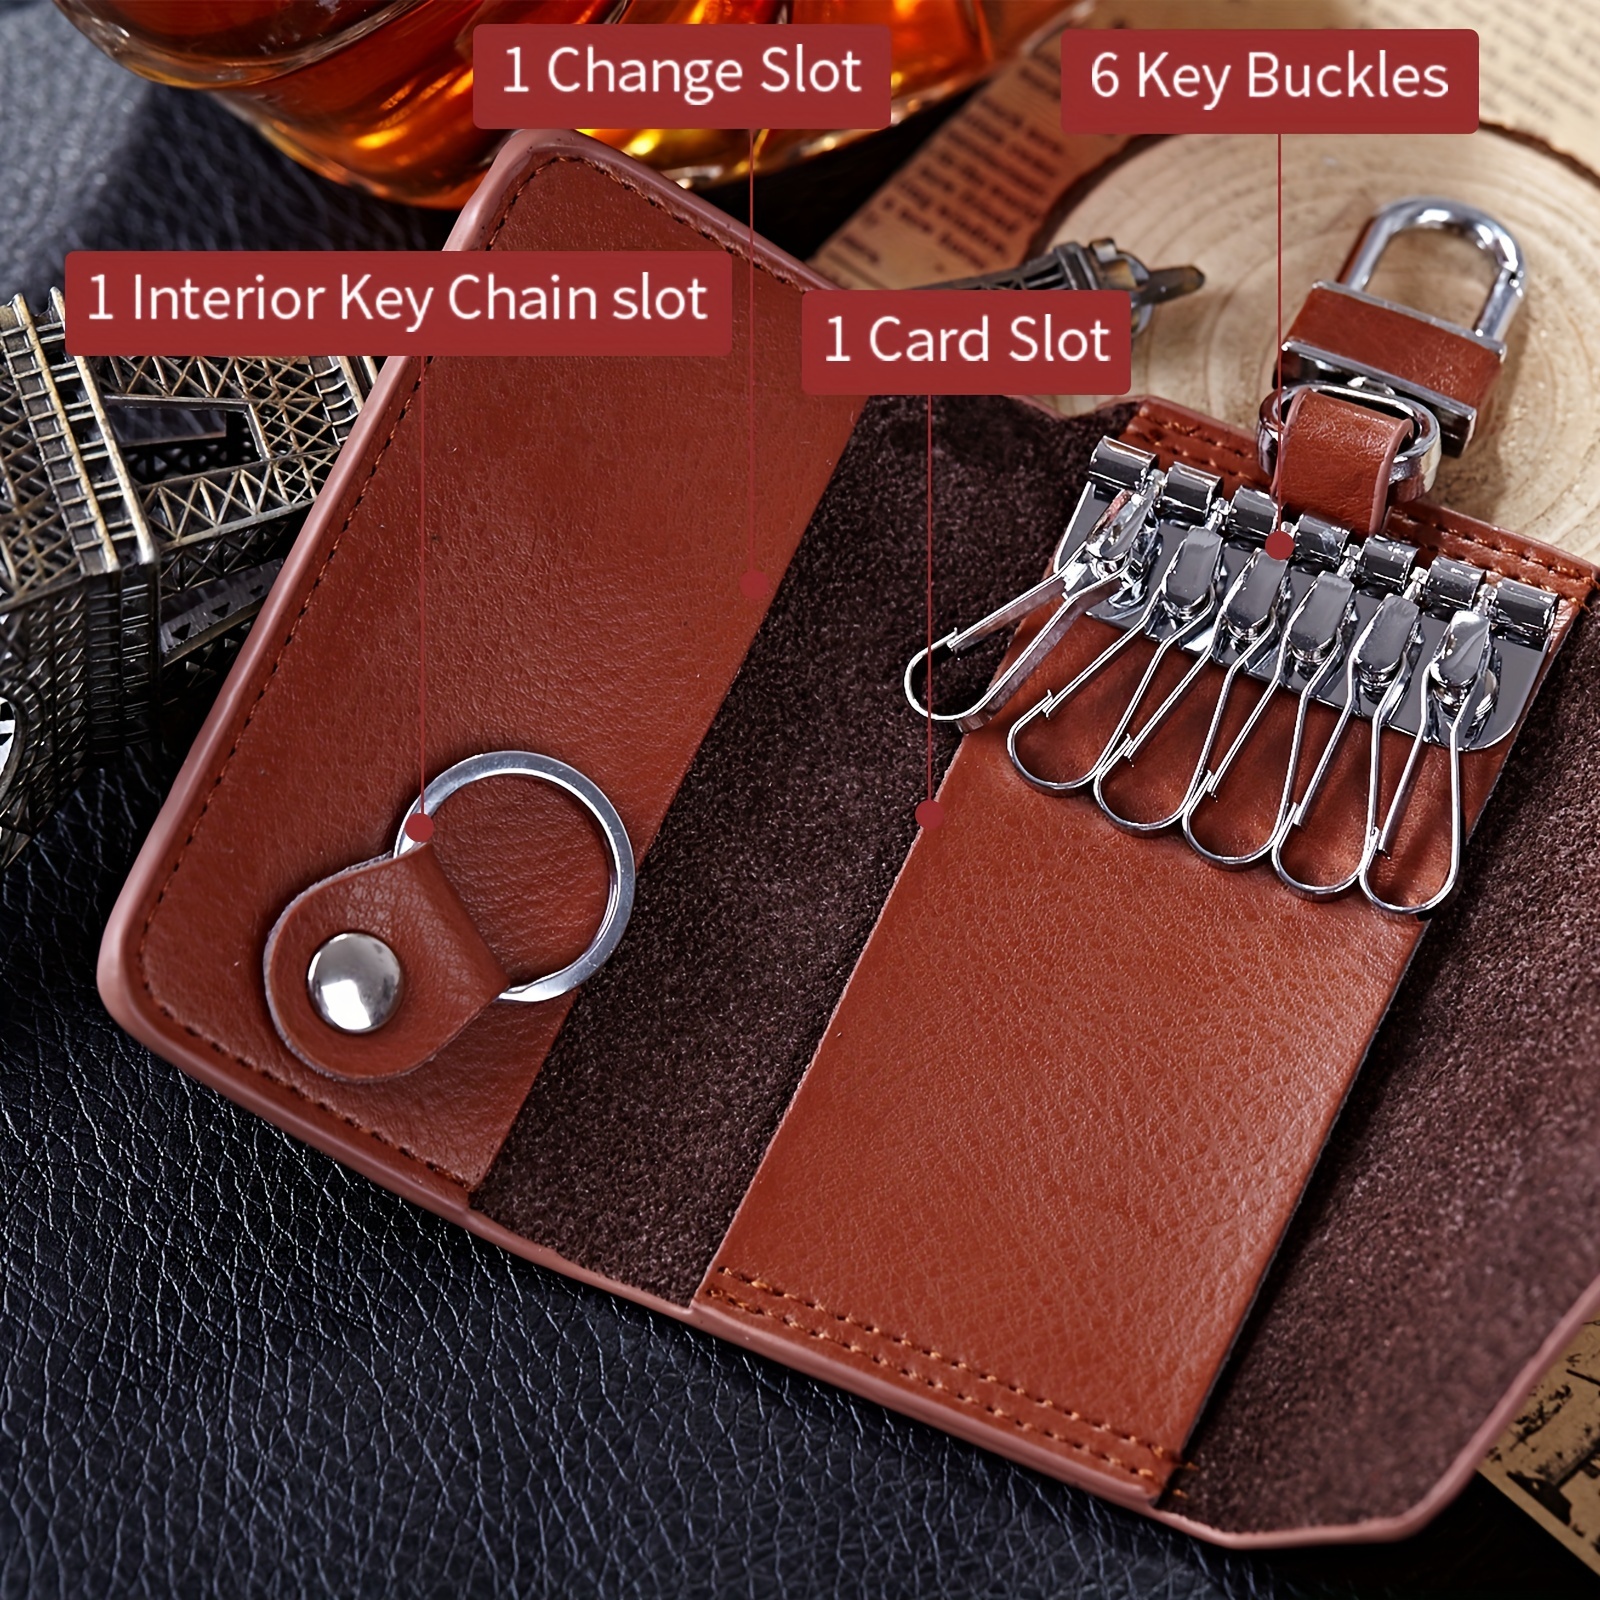 Real Leather key case leather key holder leather key wallet for 6